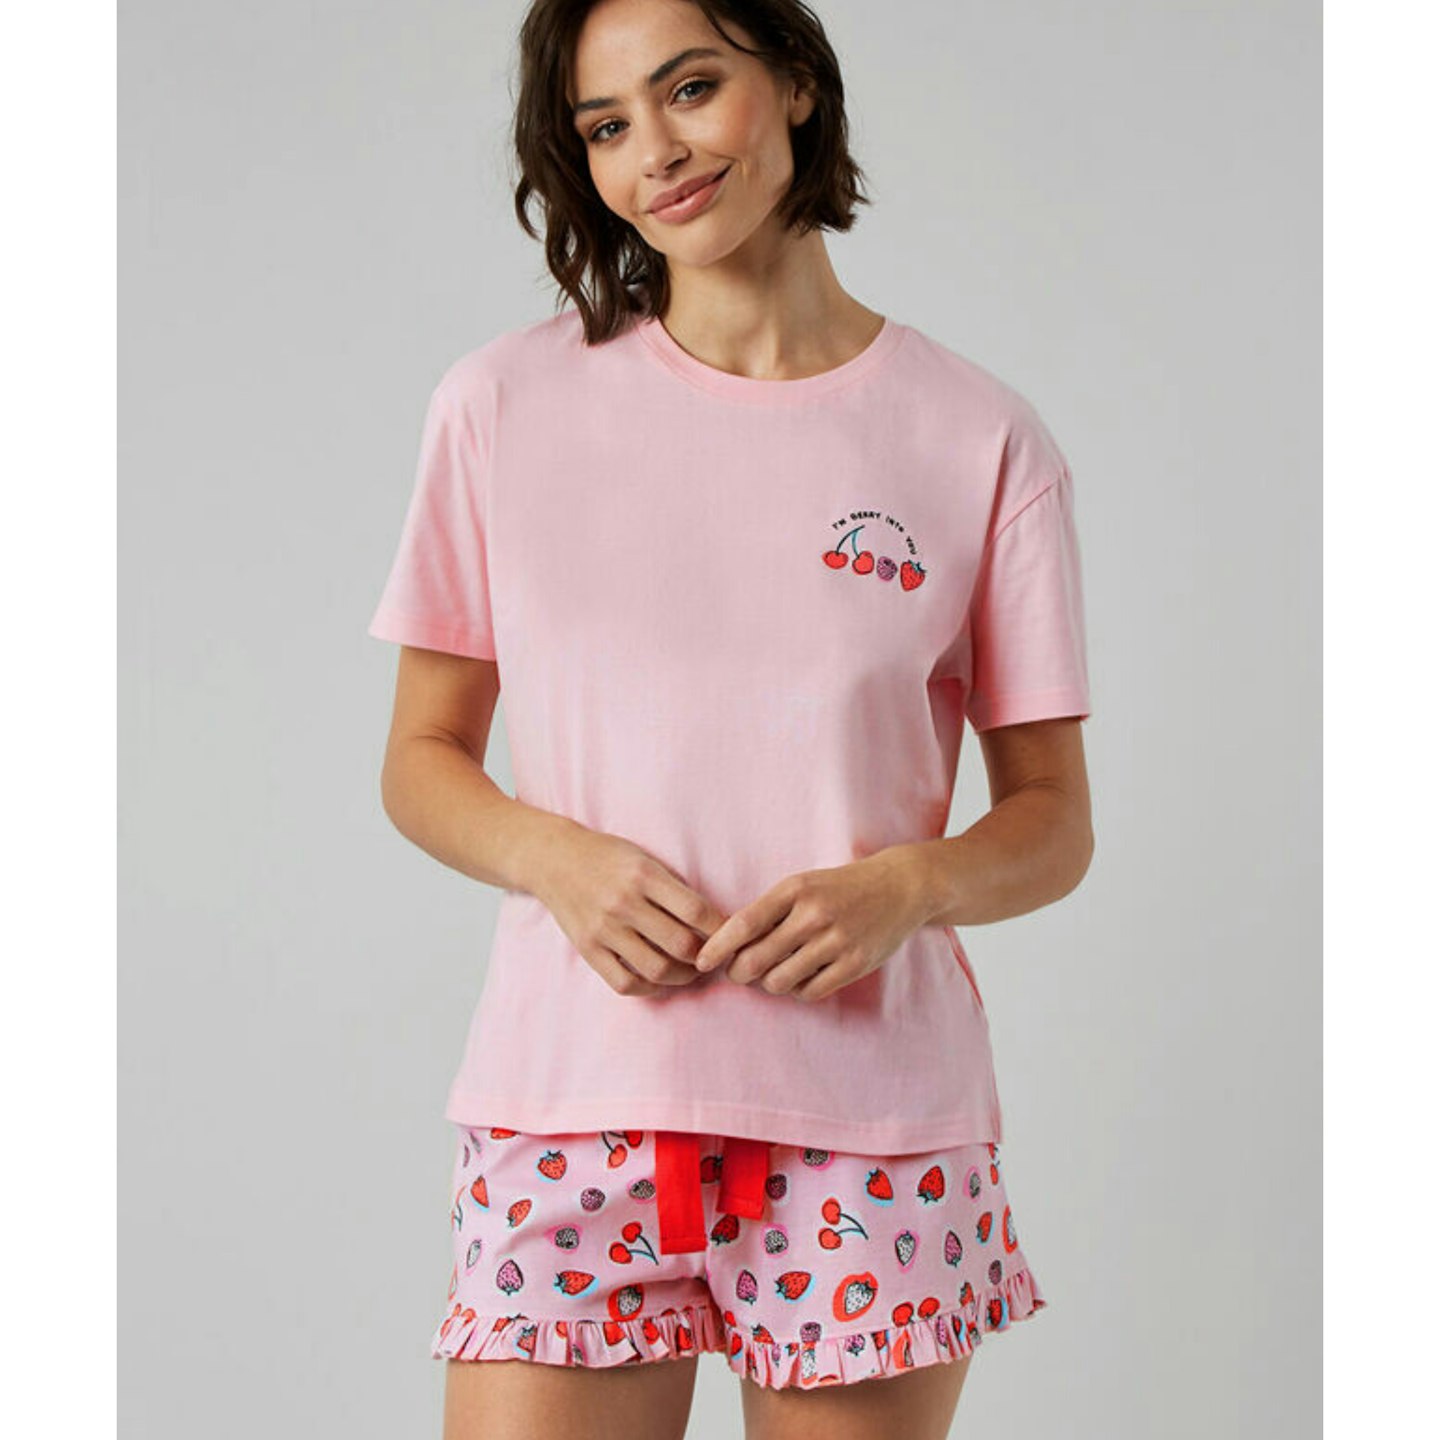 I'm Berry Into You" Pyjama Set, chosen by Commercial Content Writer, Jade Moscrop